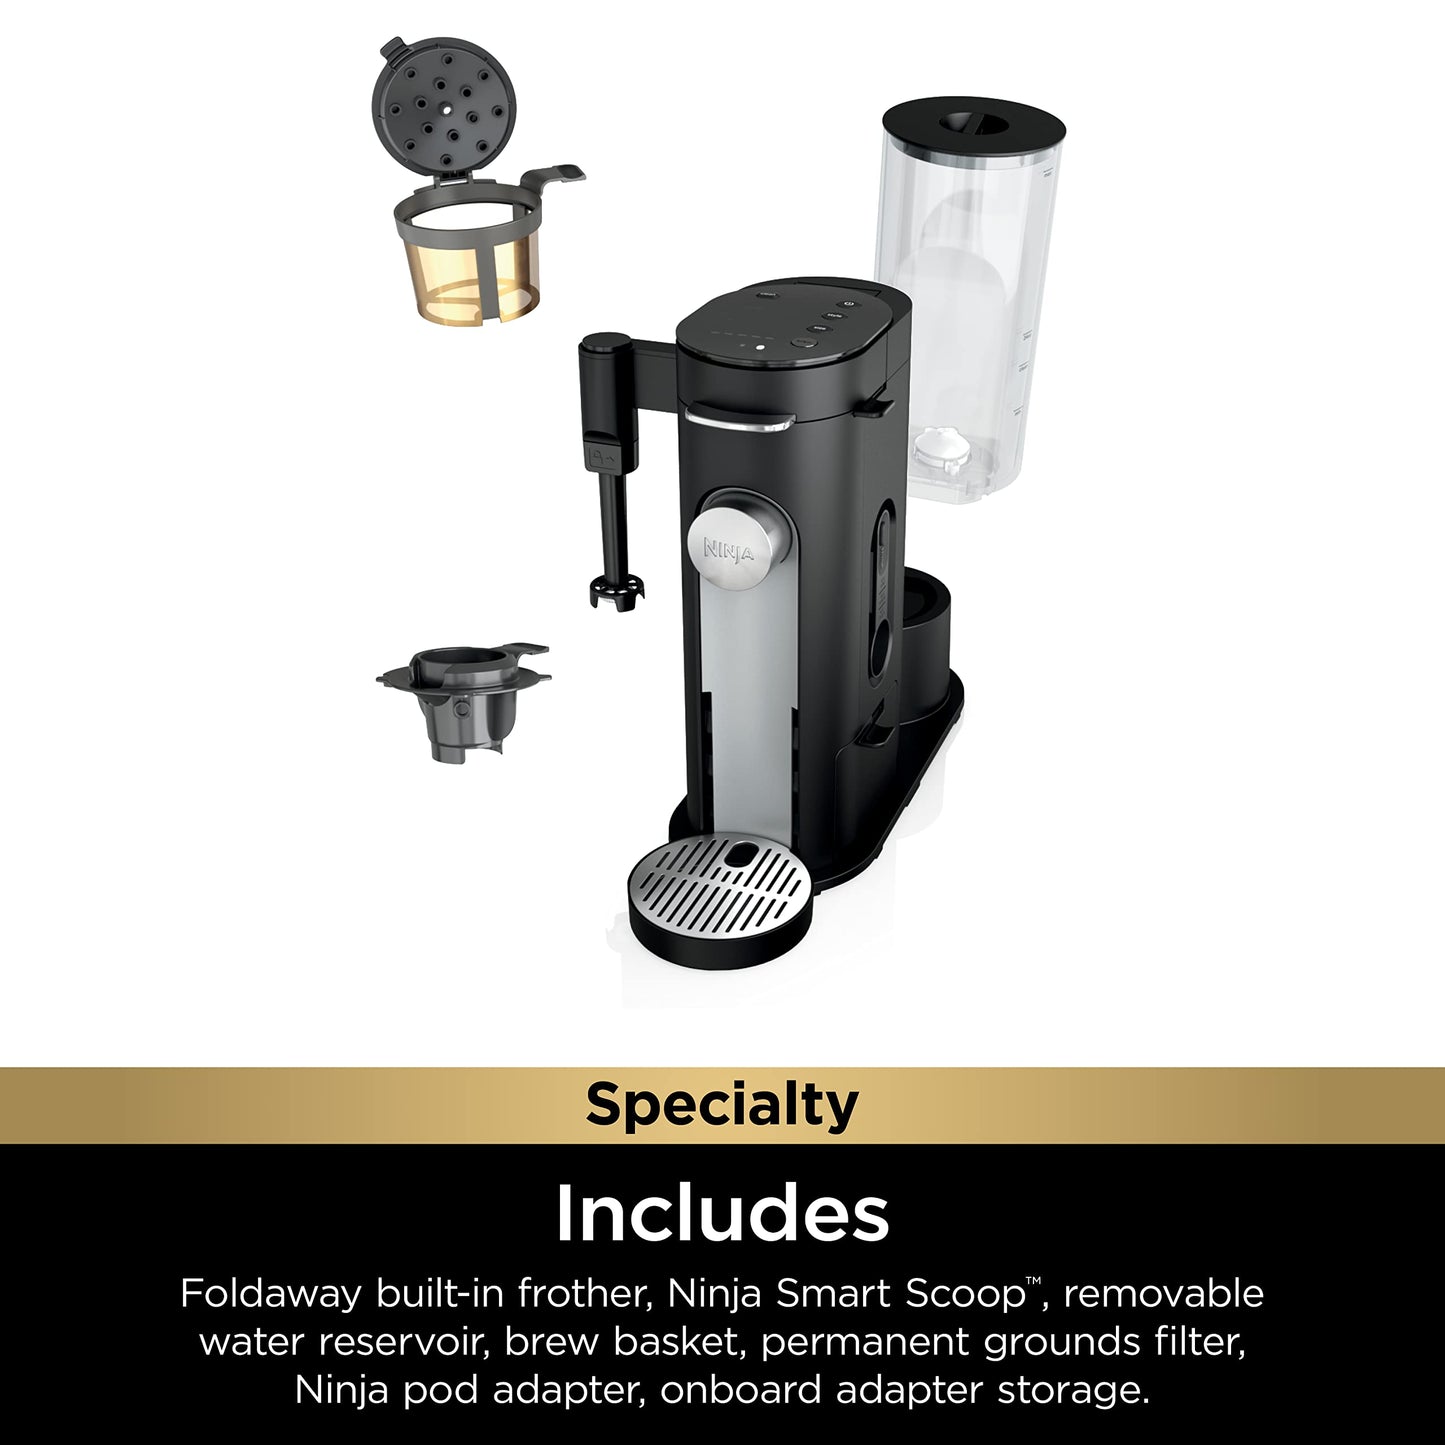 Ninja PB051 Pod & Grounds Specialty Single-Serve Coffee Maker, K-Cup Pod Compatible, Brews Grounds, Compact Design, Built-In Milk Frother, 56-oz. Reservoir, 6-oz. Cup to 24-oz. Mug Sizes, Black - Like New